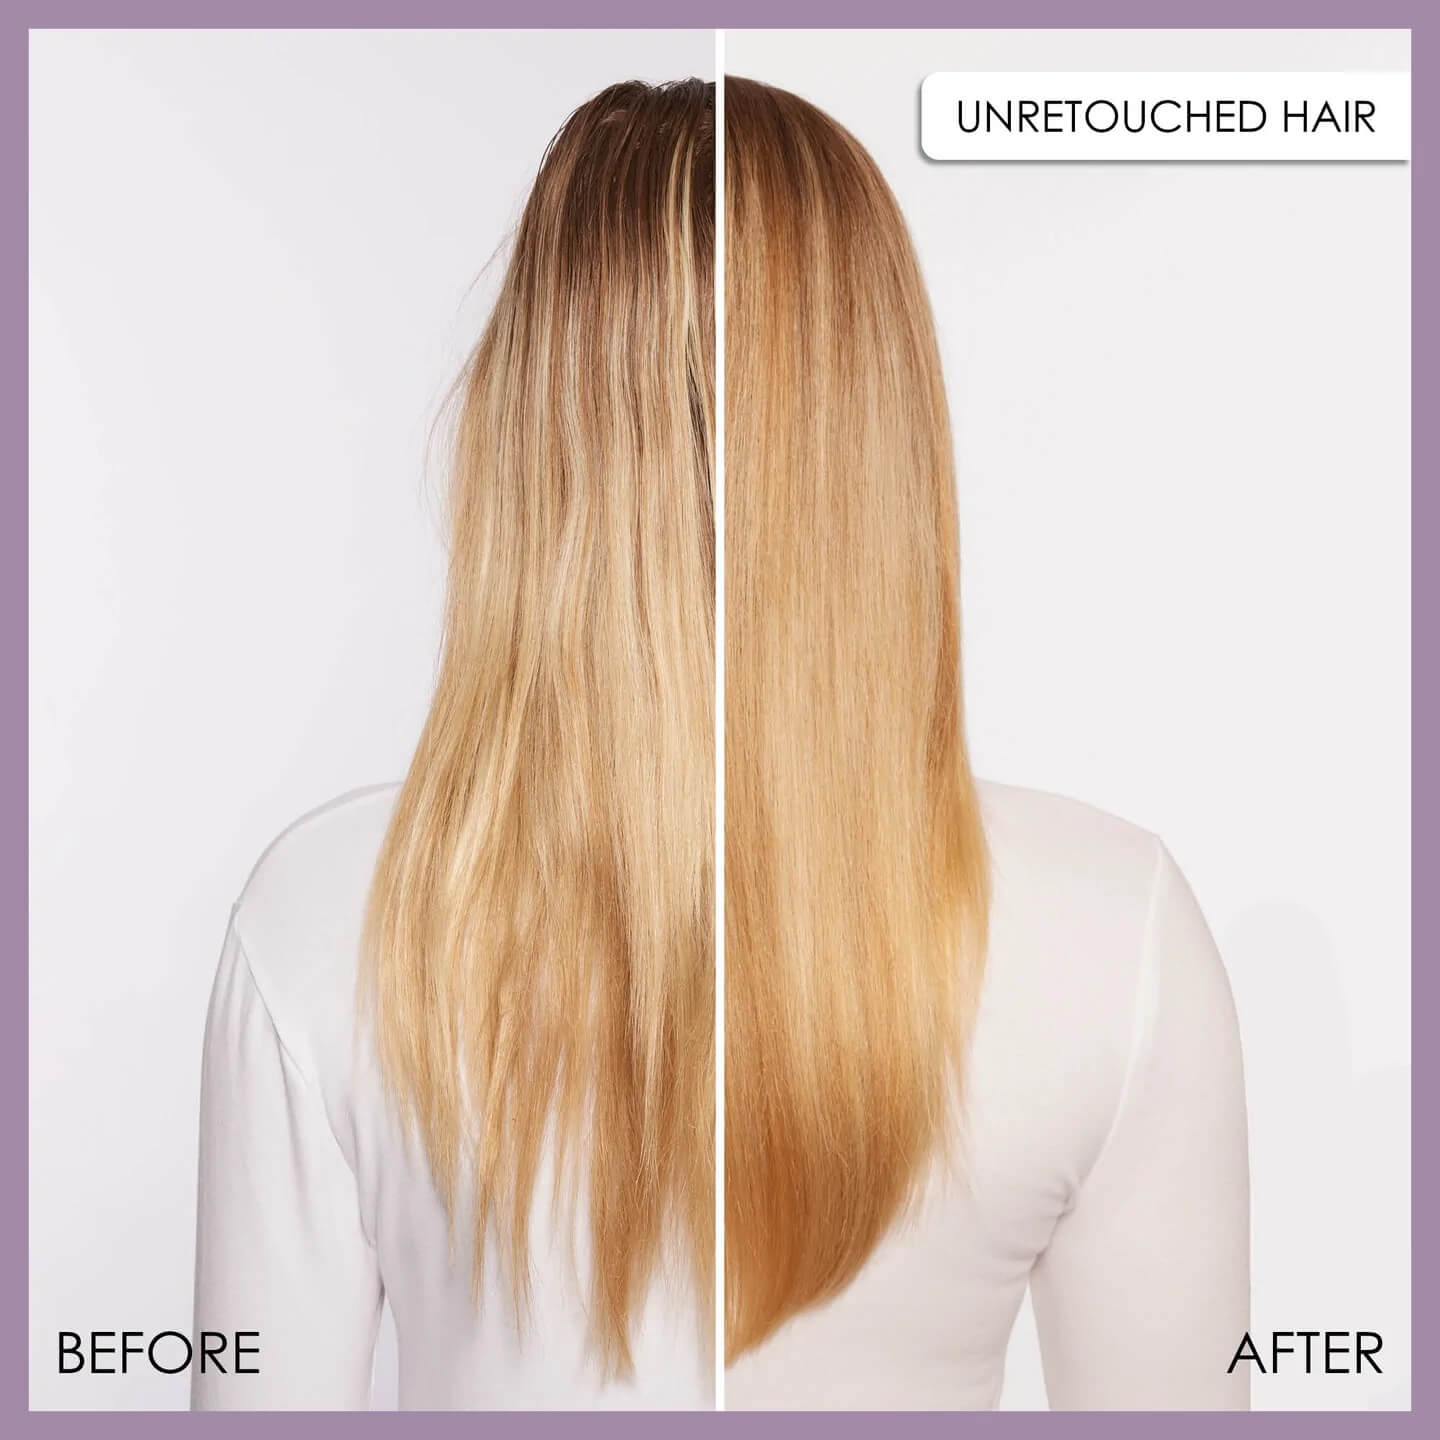 hair repair treatment kit before and after image